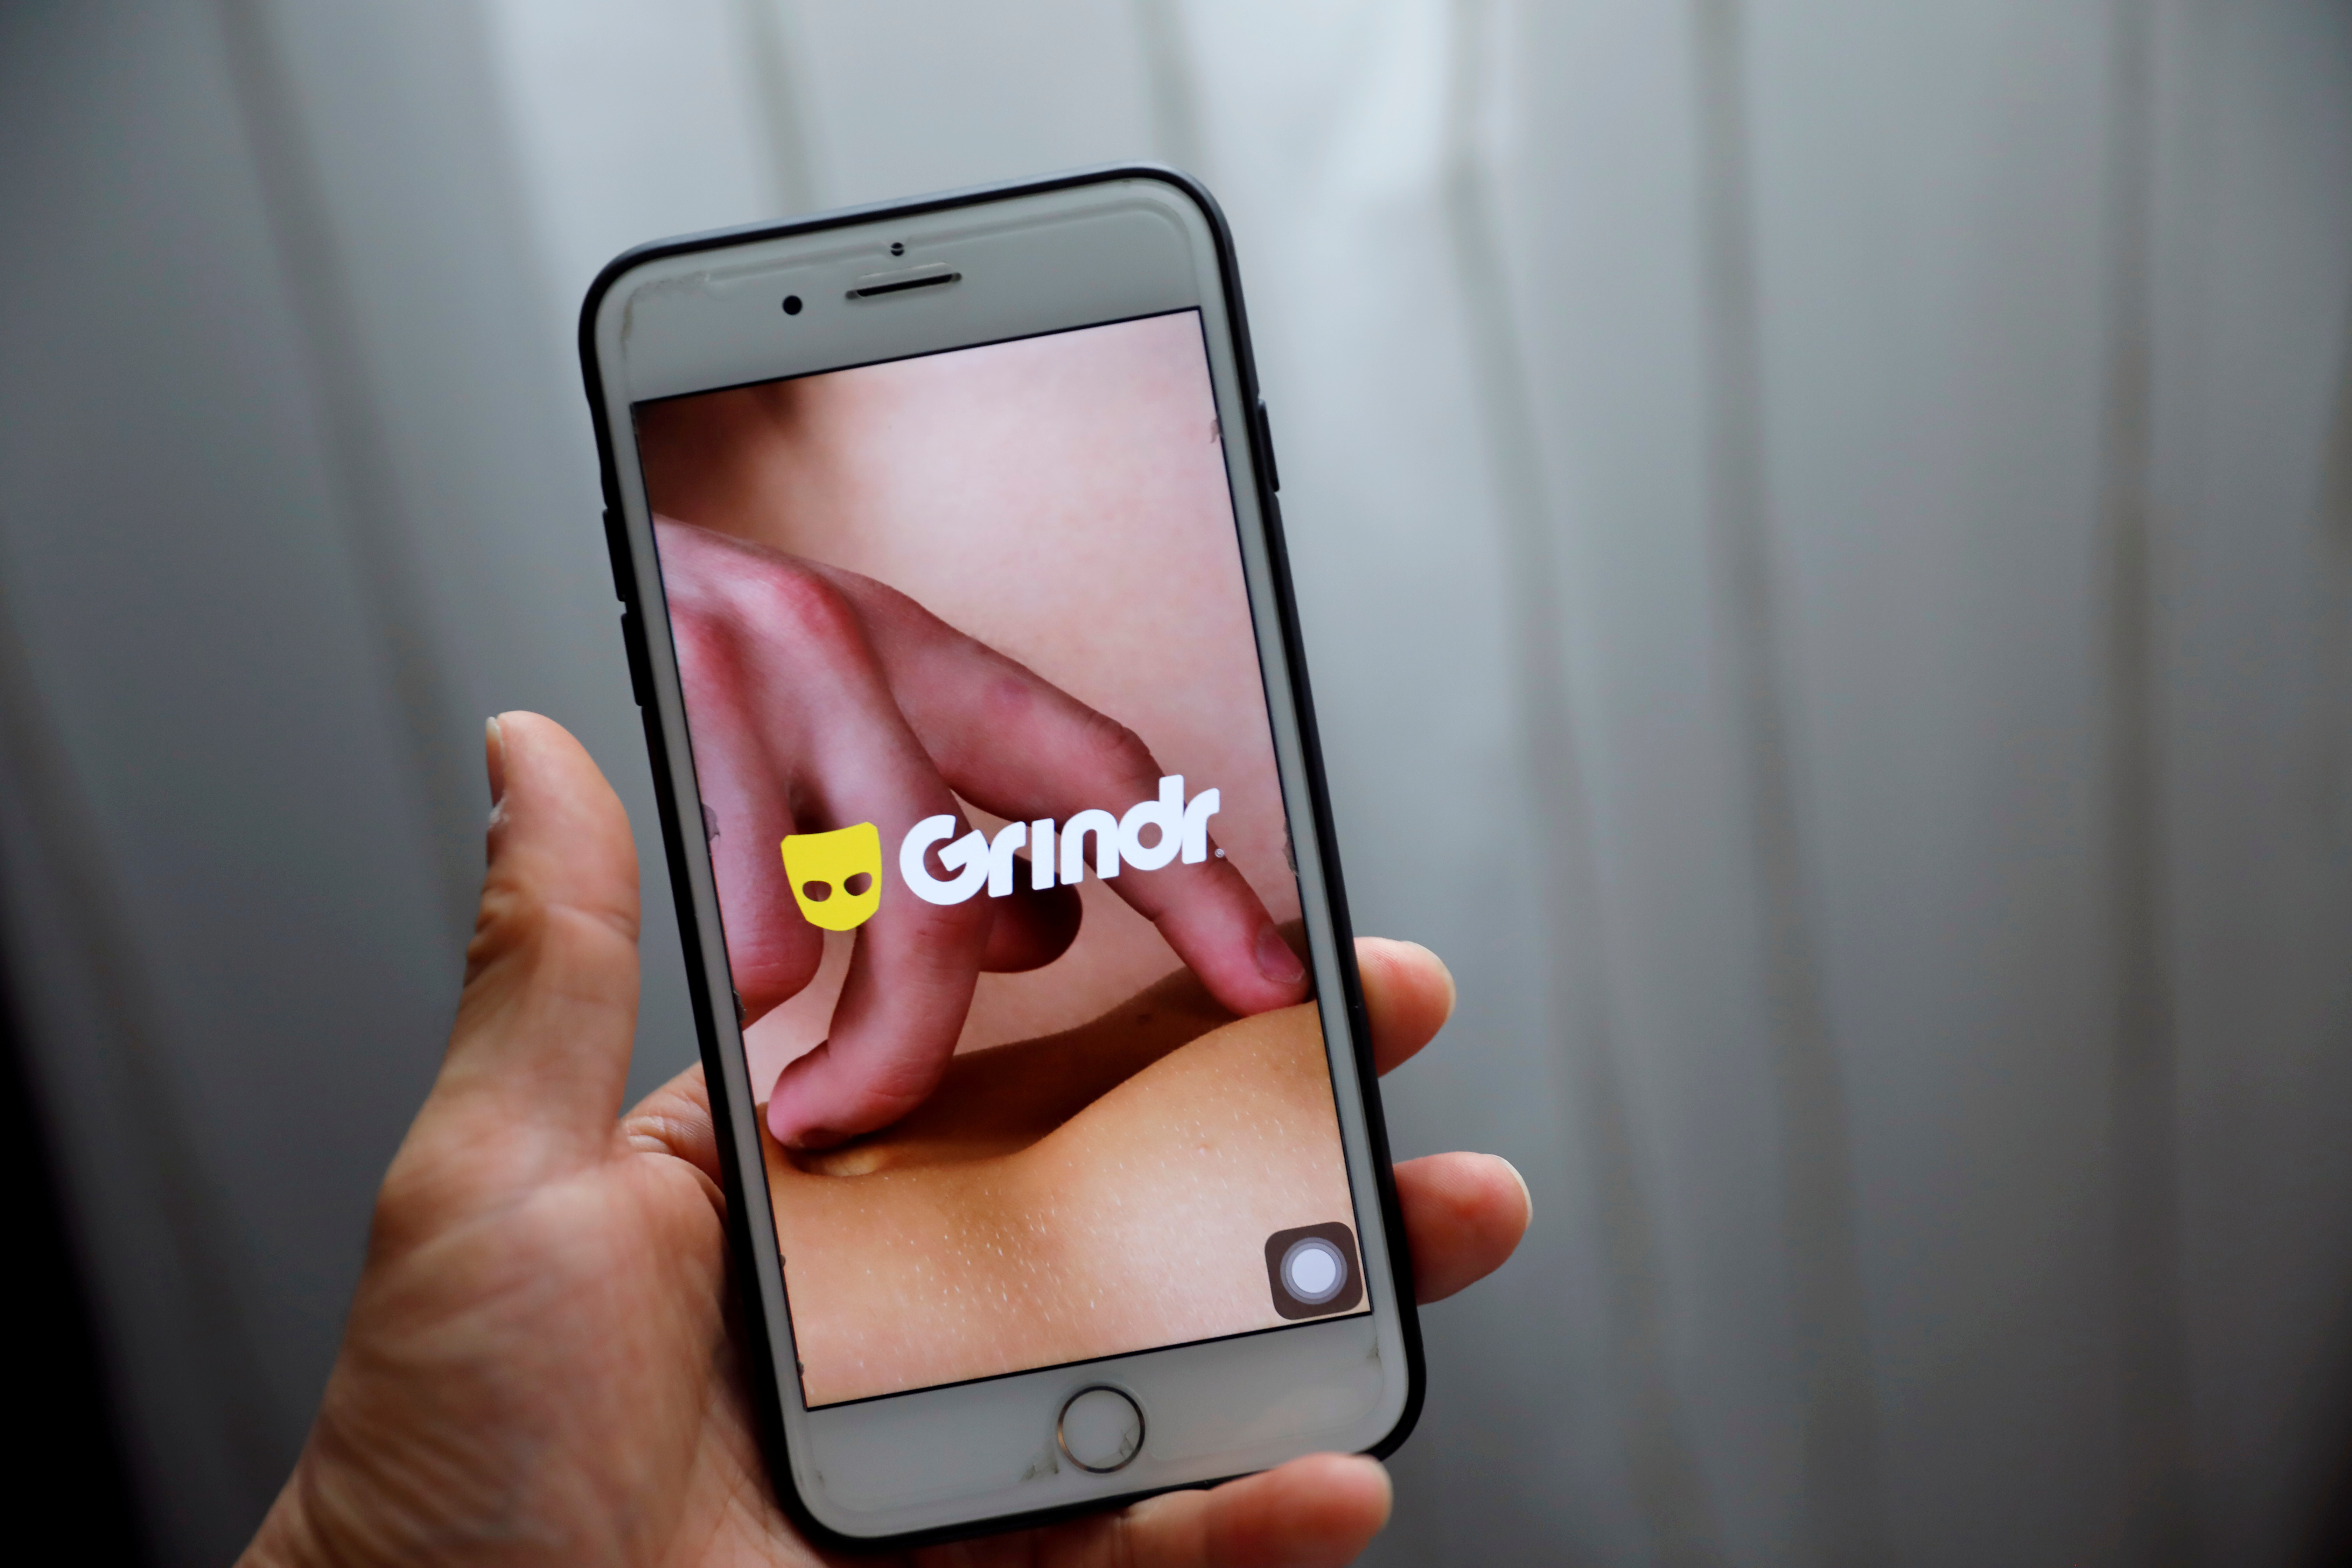 Grindr app is seen on a mobile phone in this photo illustration taken in Shanghai